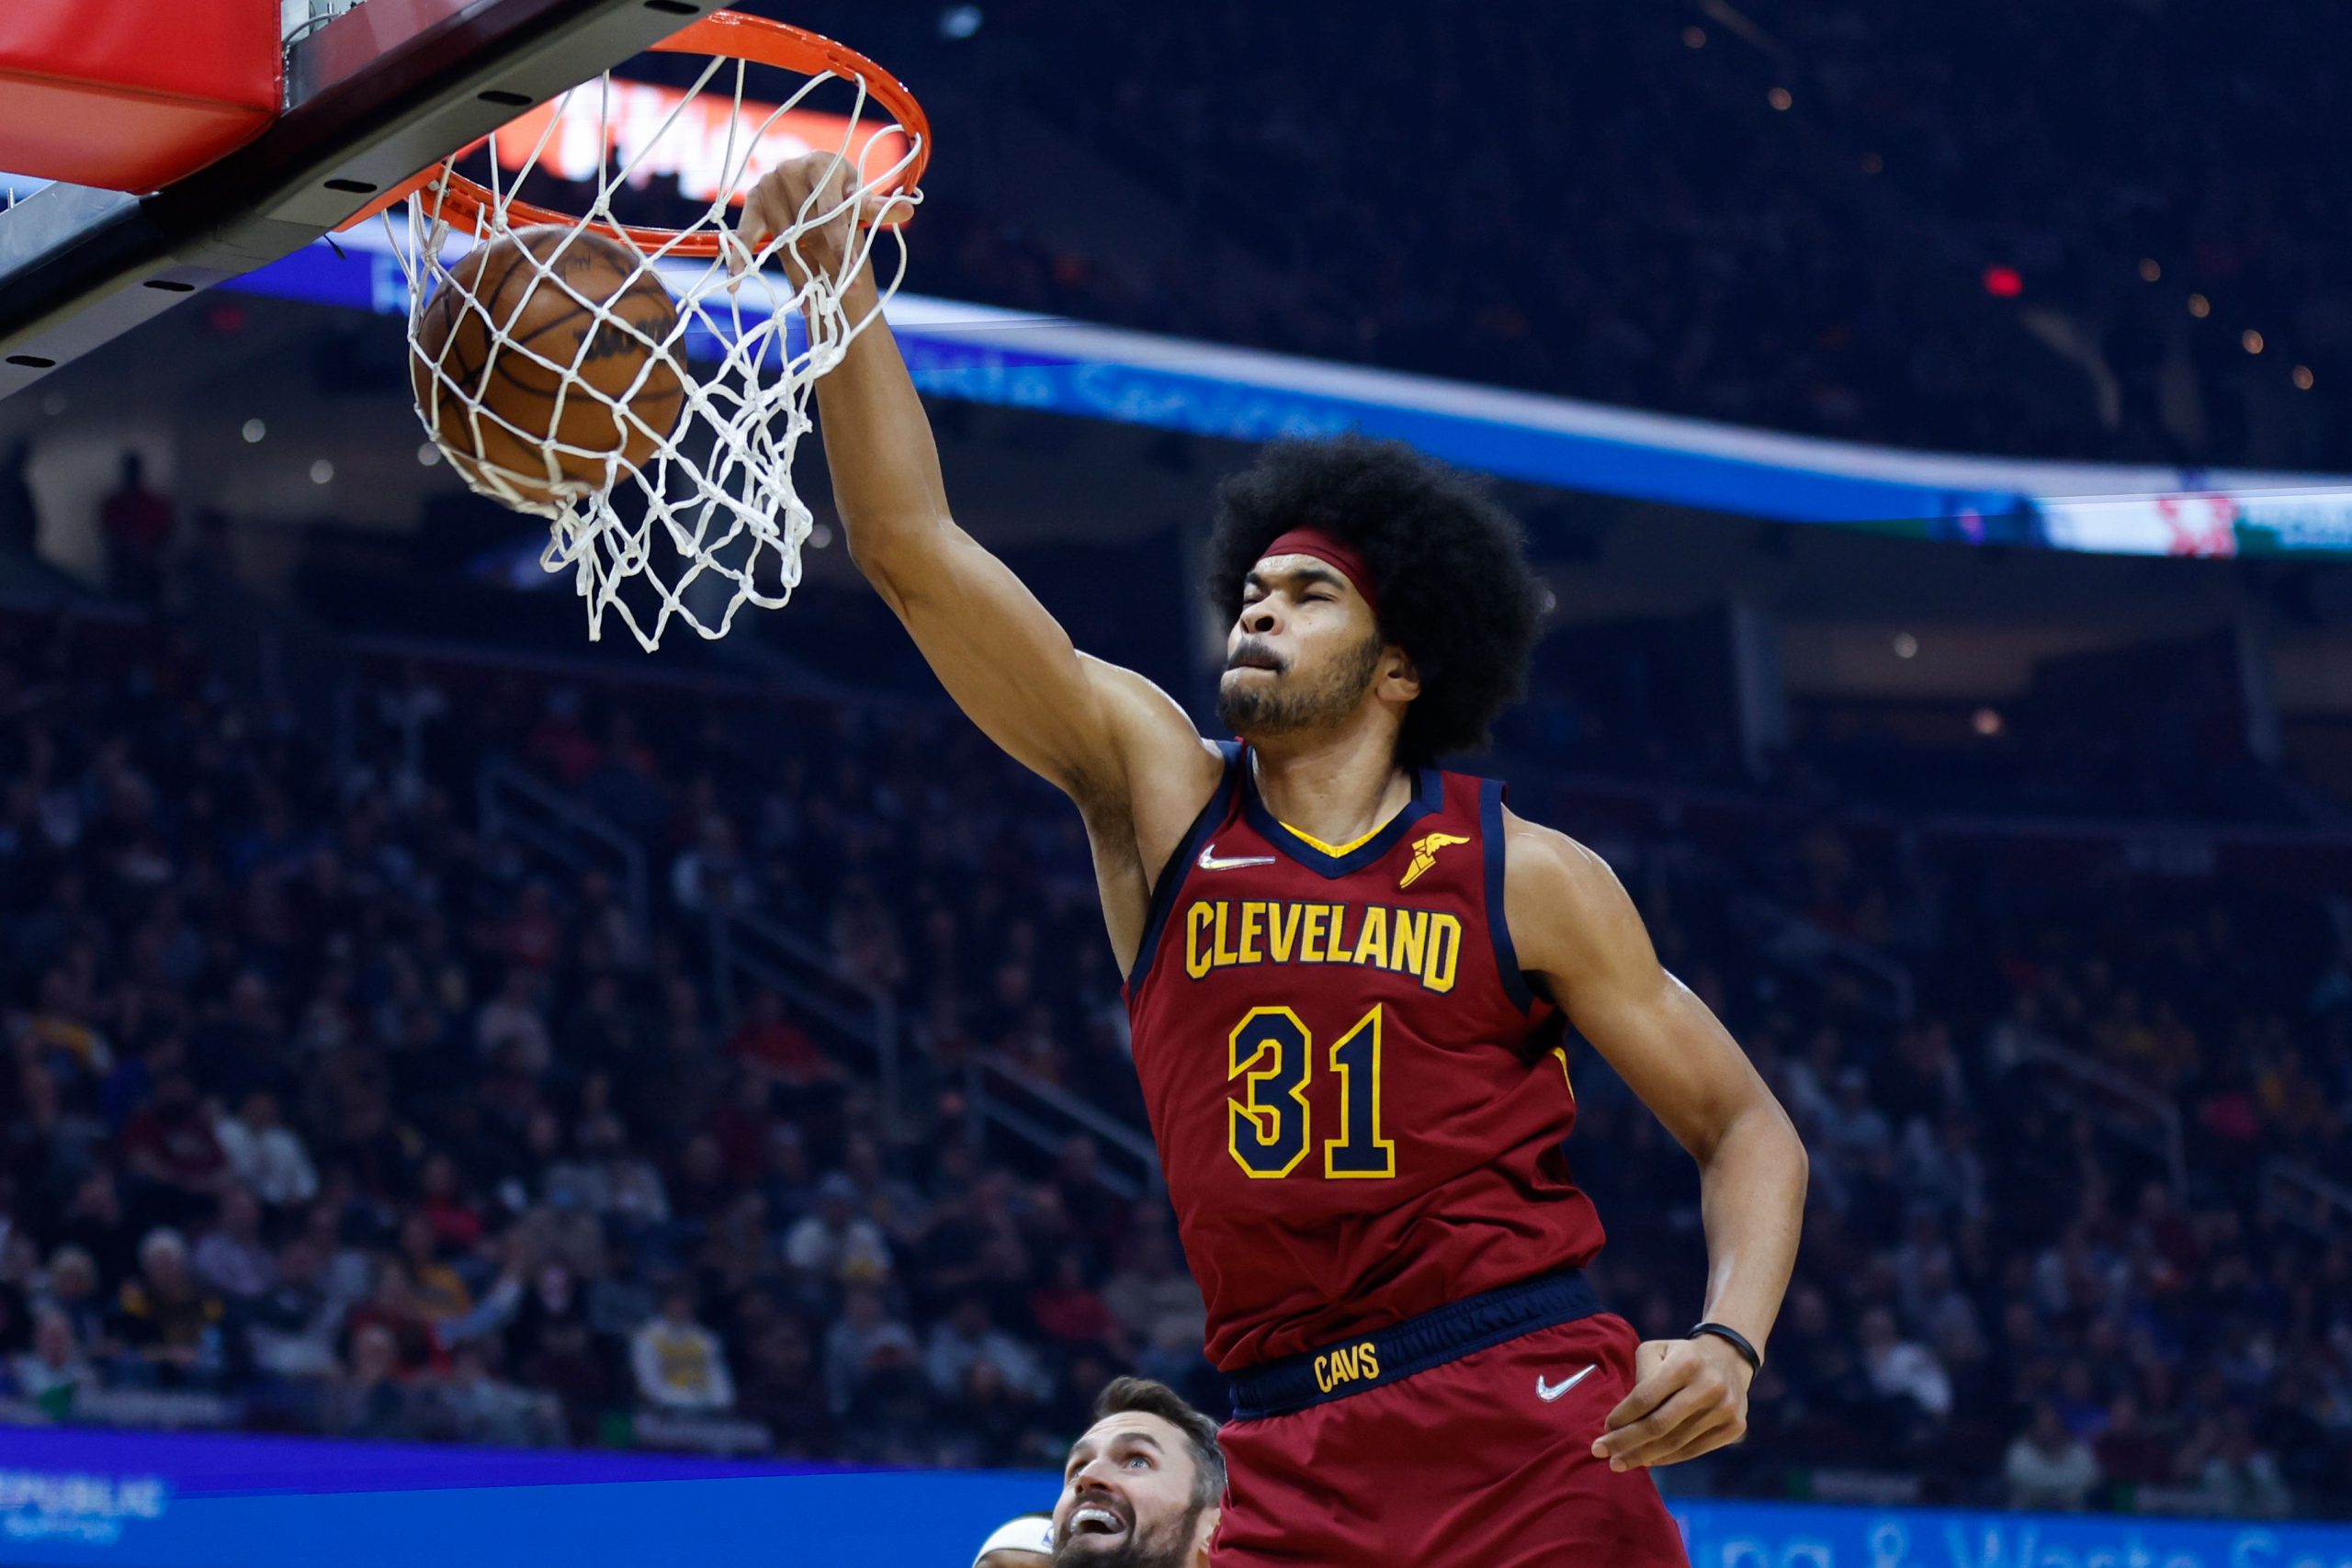 NBA: Cleveland Cavaliers rally from 20-point deficit, beat Indiana Pacers 98-85